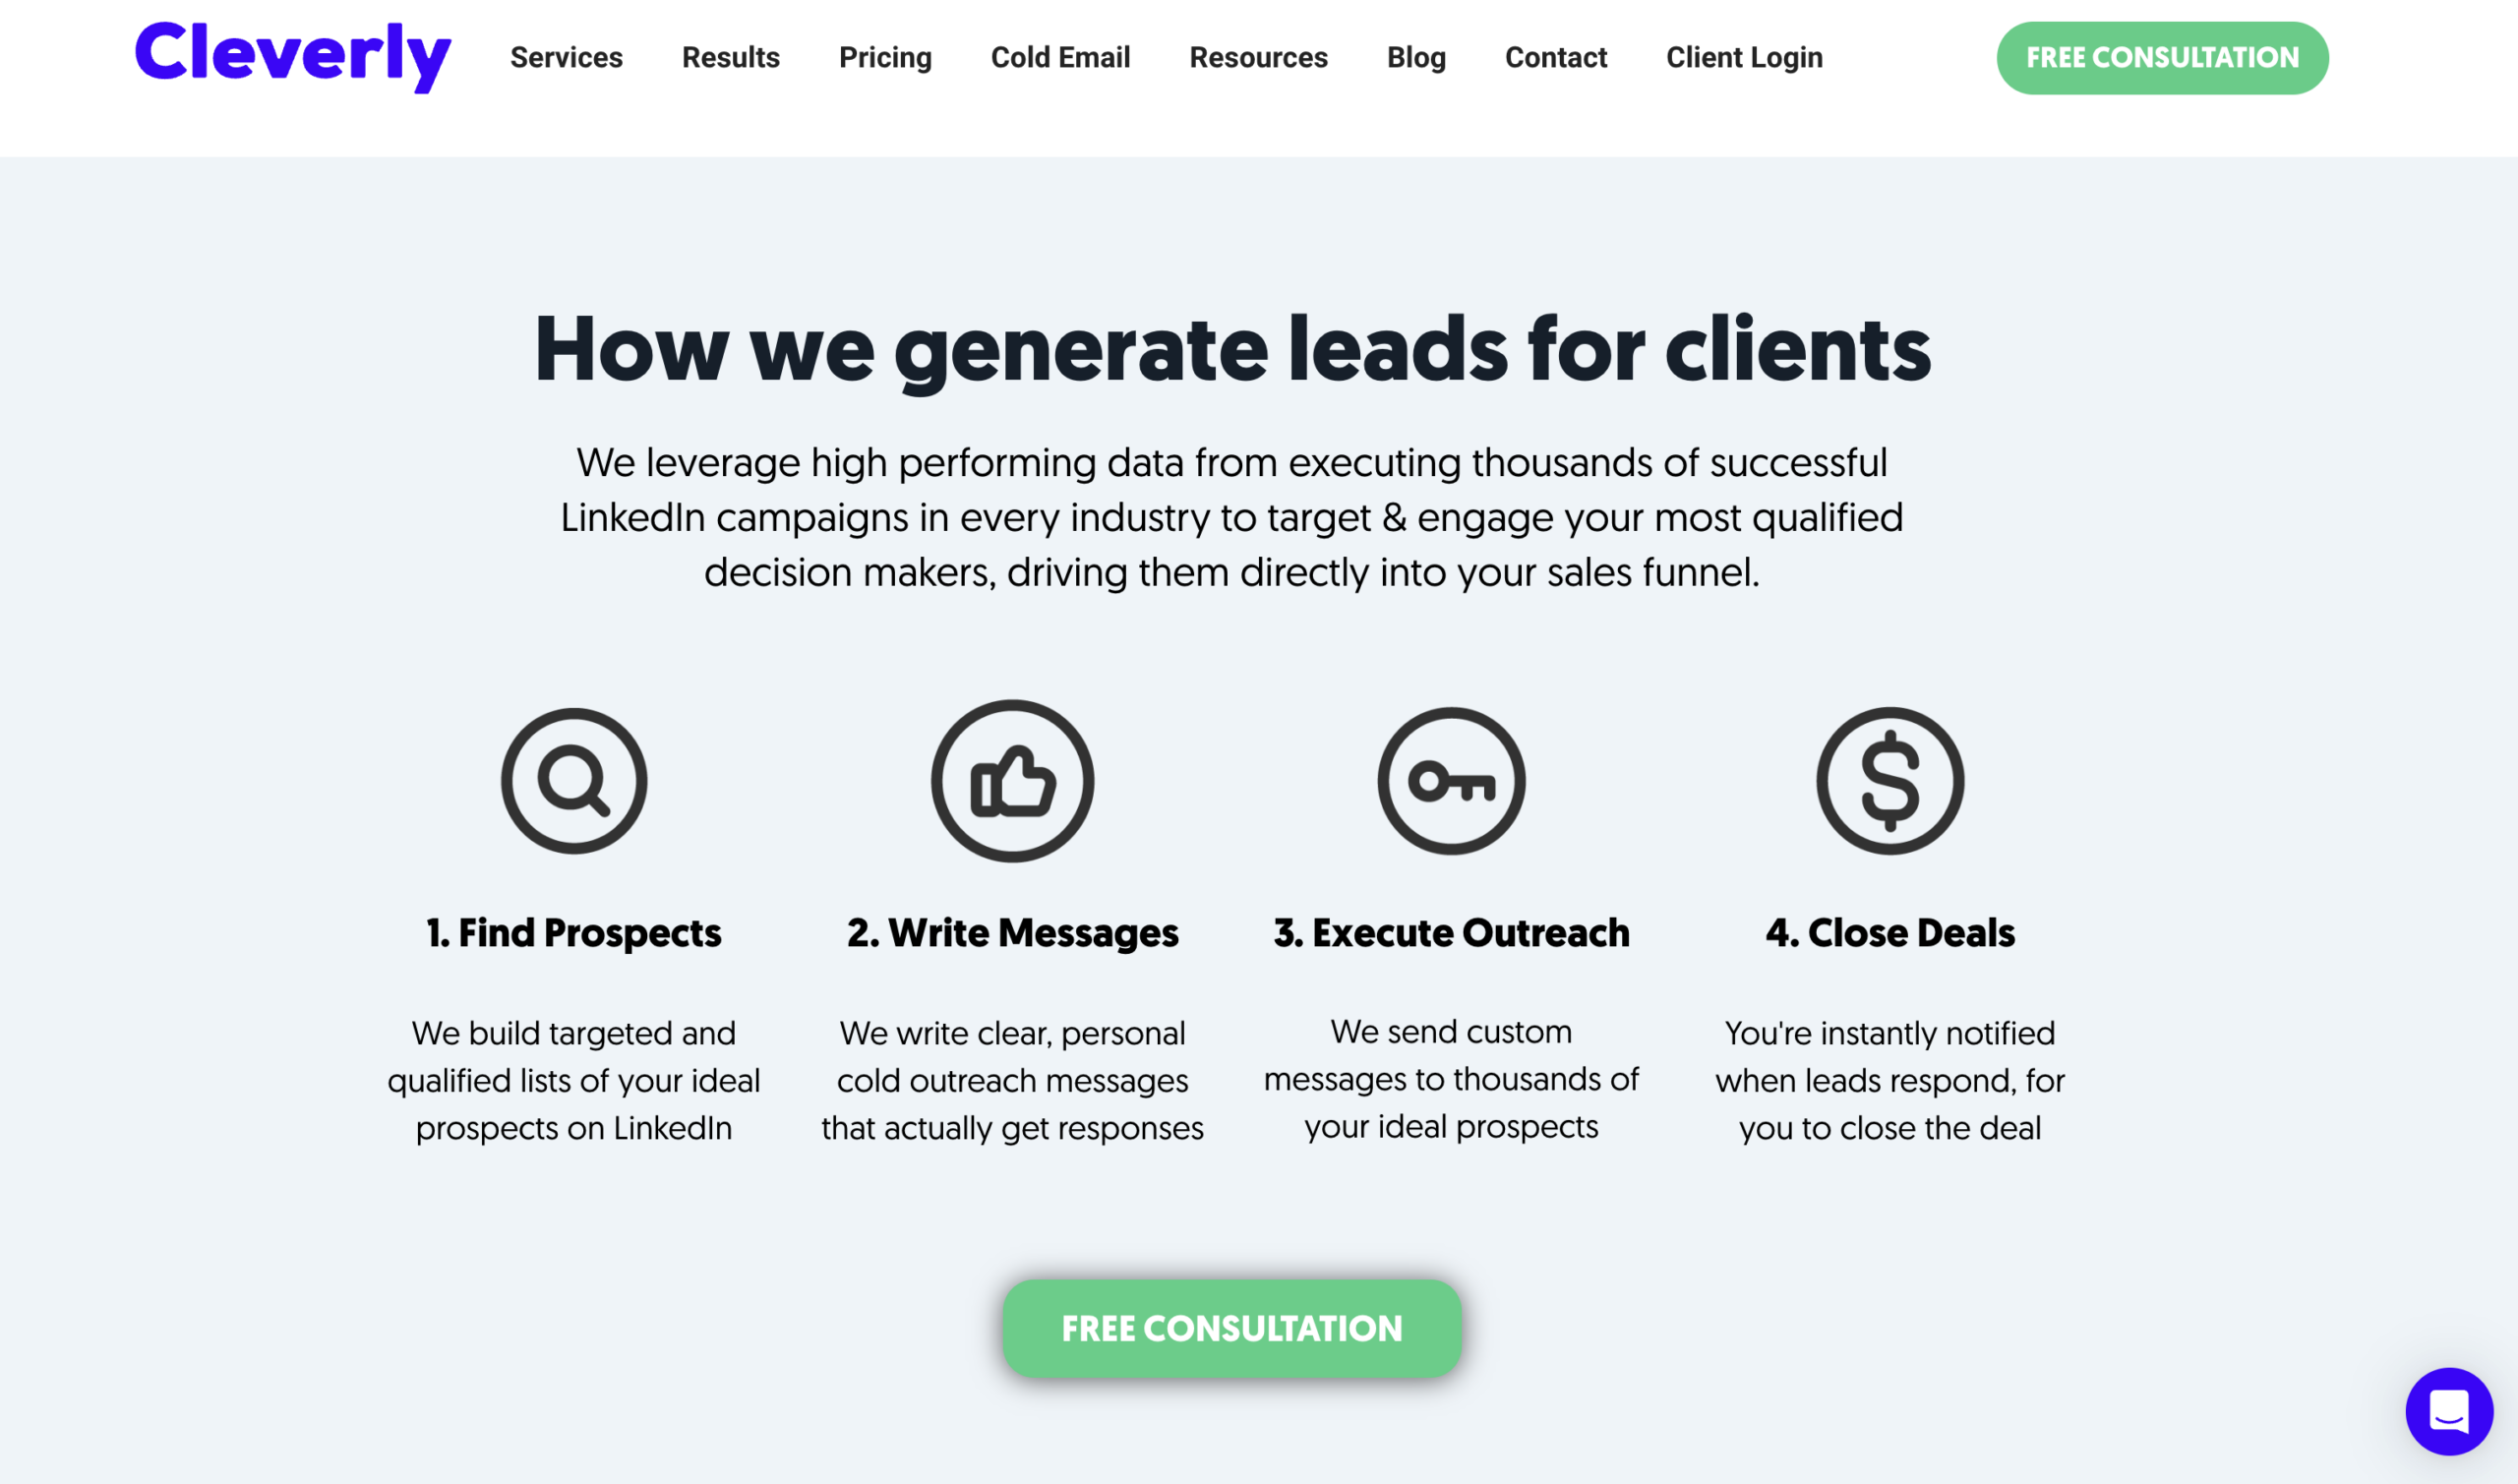 Cleverly's lead generation process.